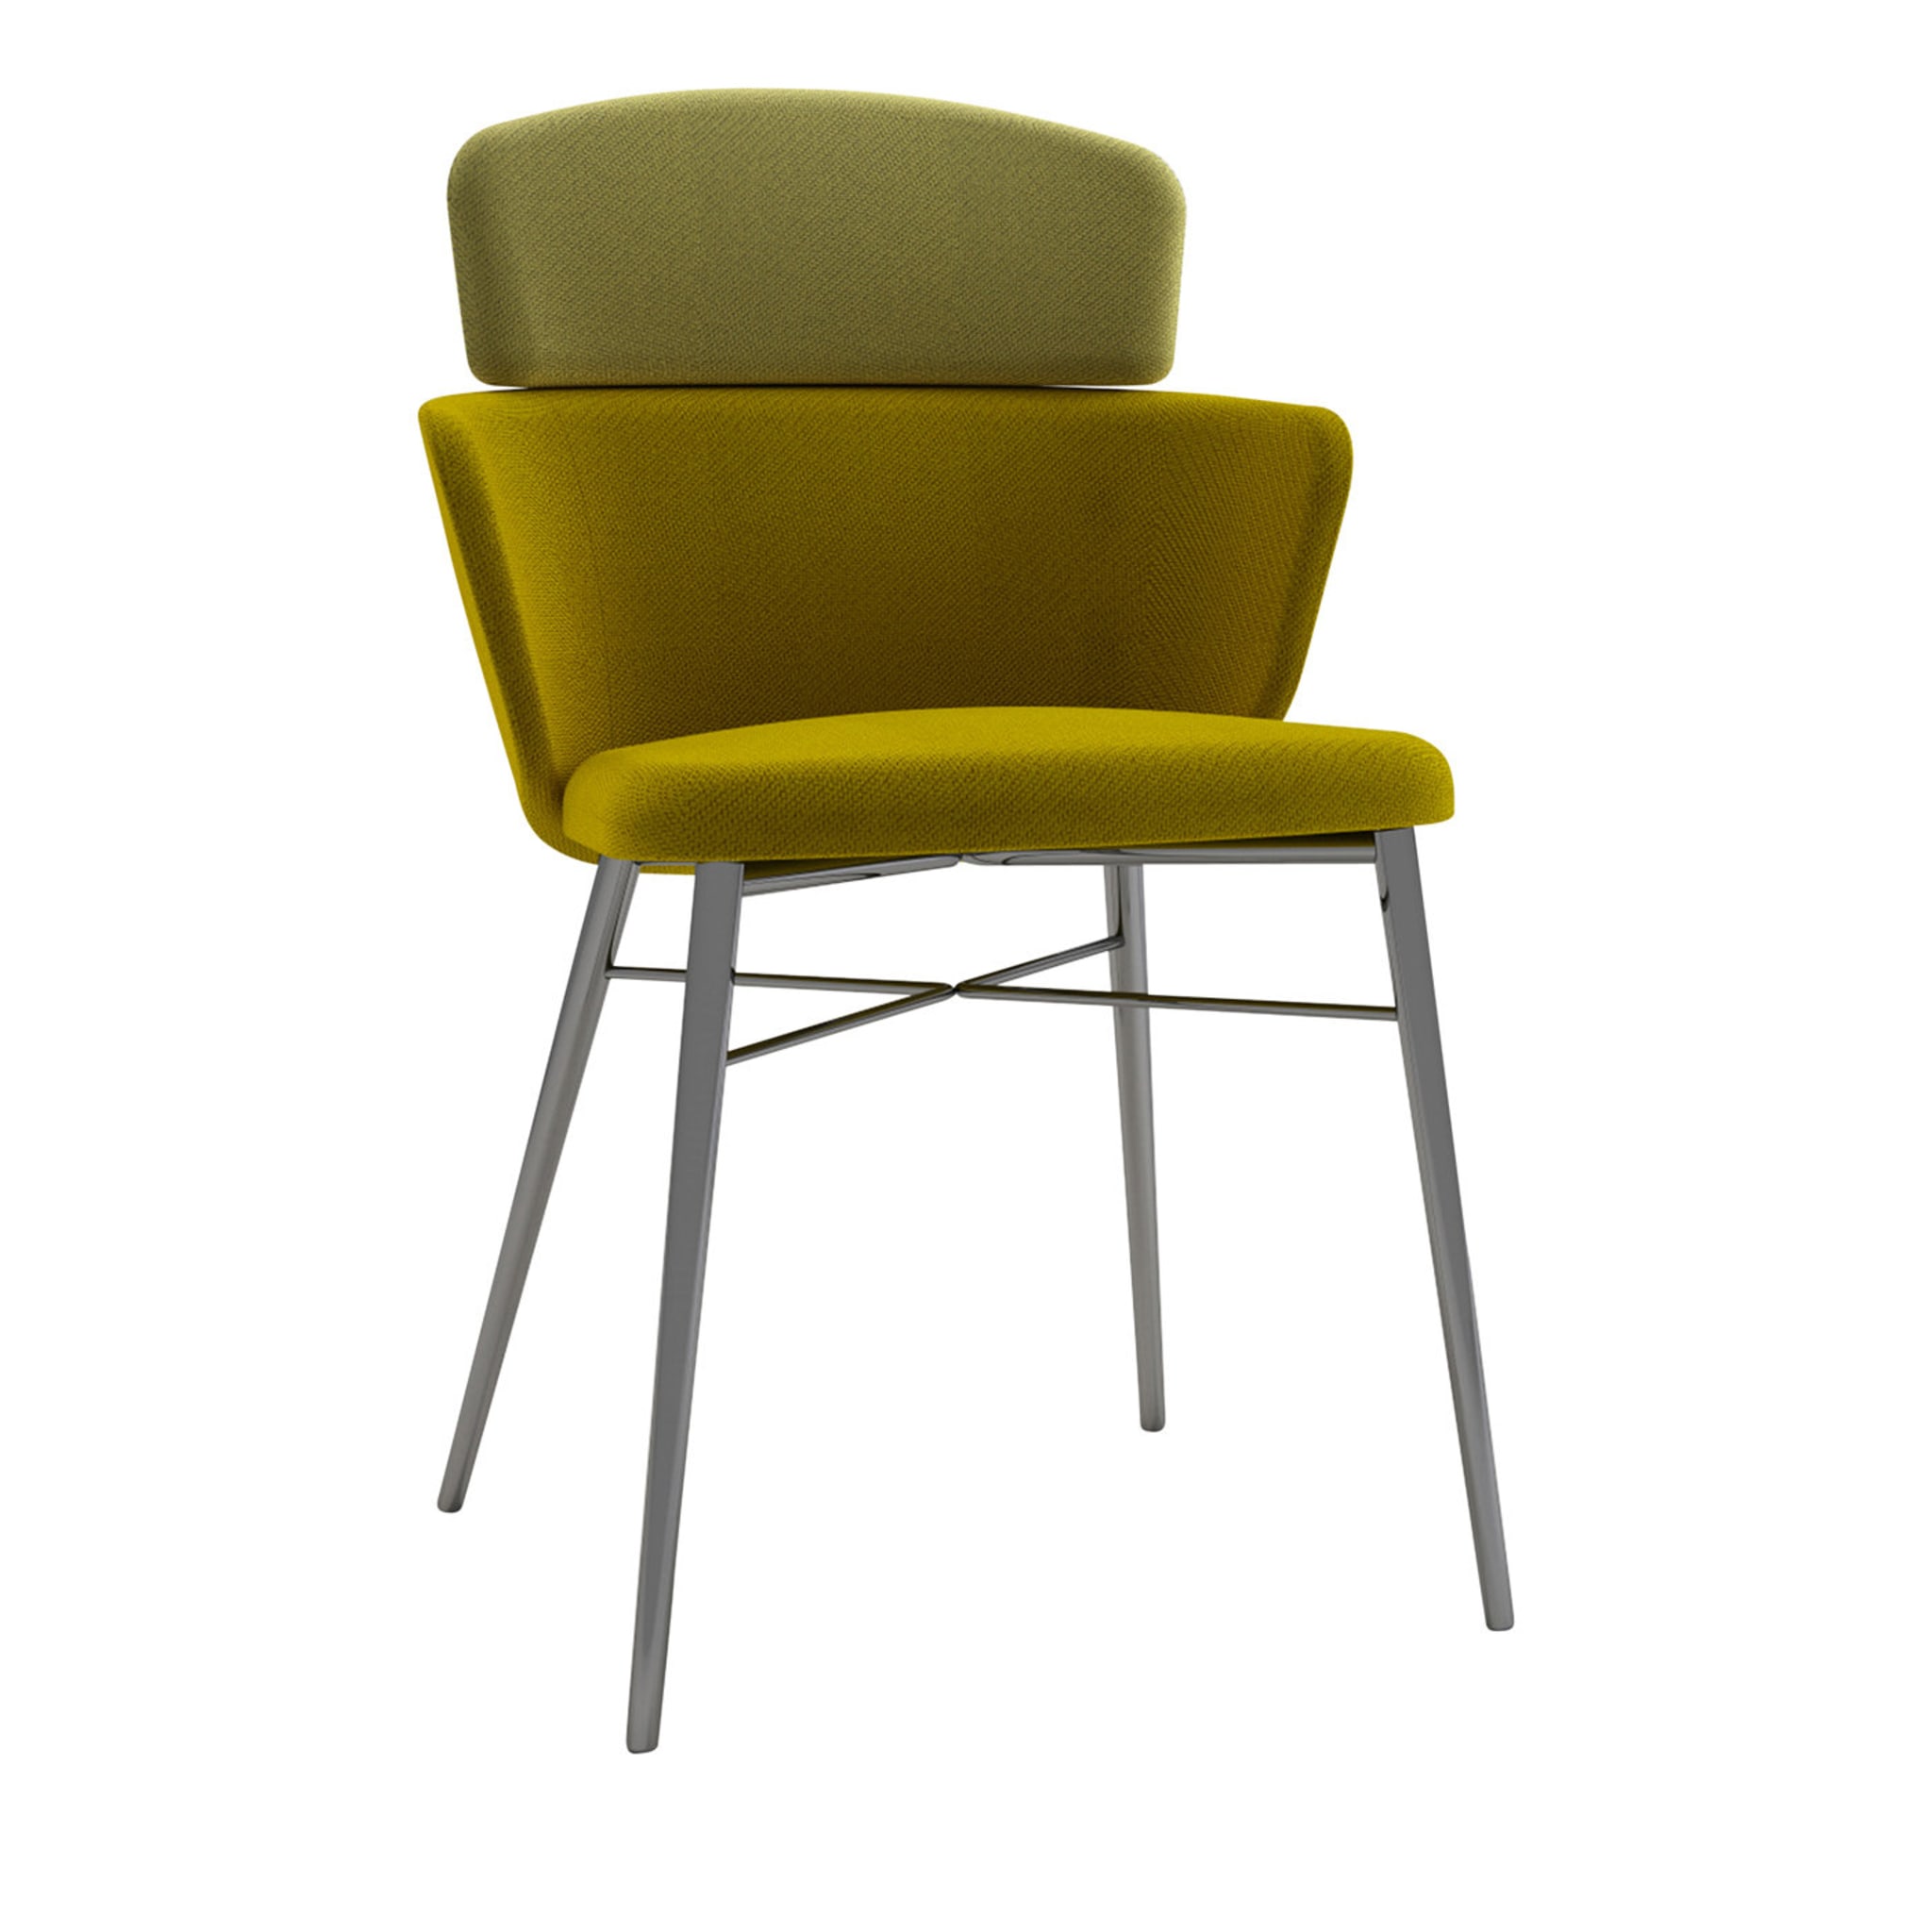 Kin Green Chair with Armrests by Radice Orlandini - Main view